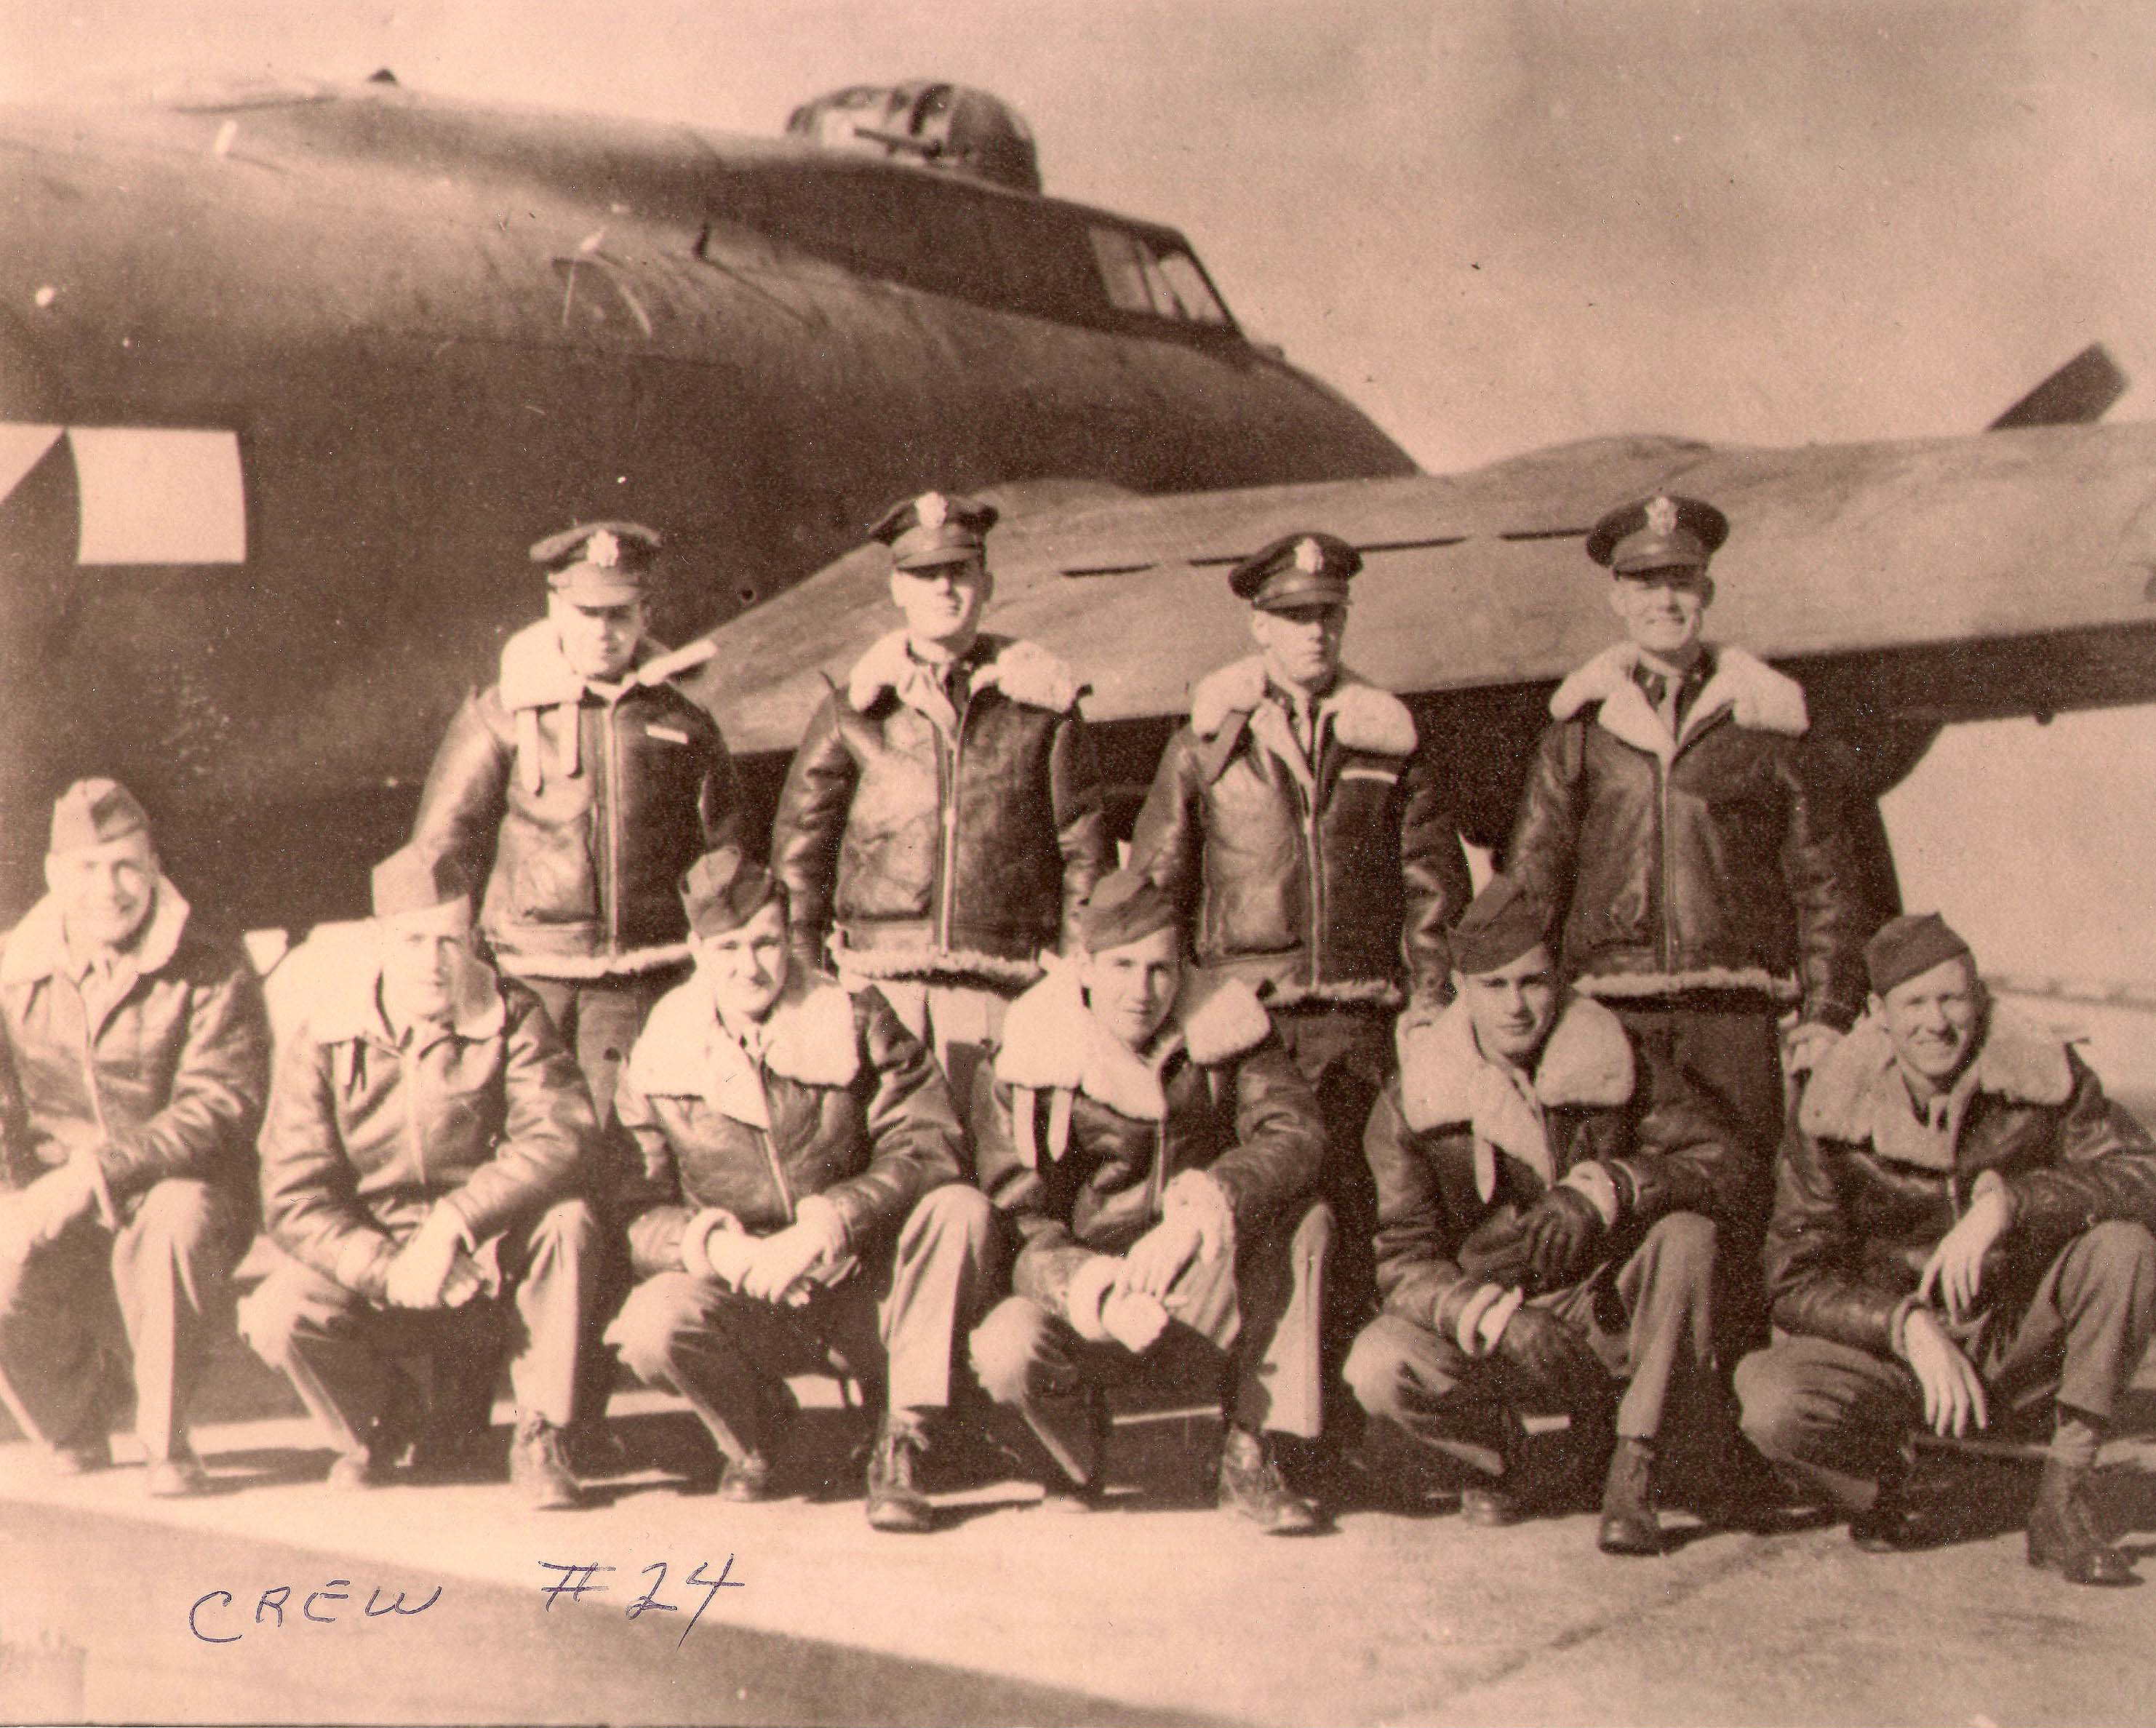 Fairbanks' Crew - 601st Squadron - February or March 1944  